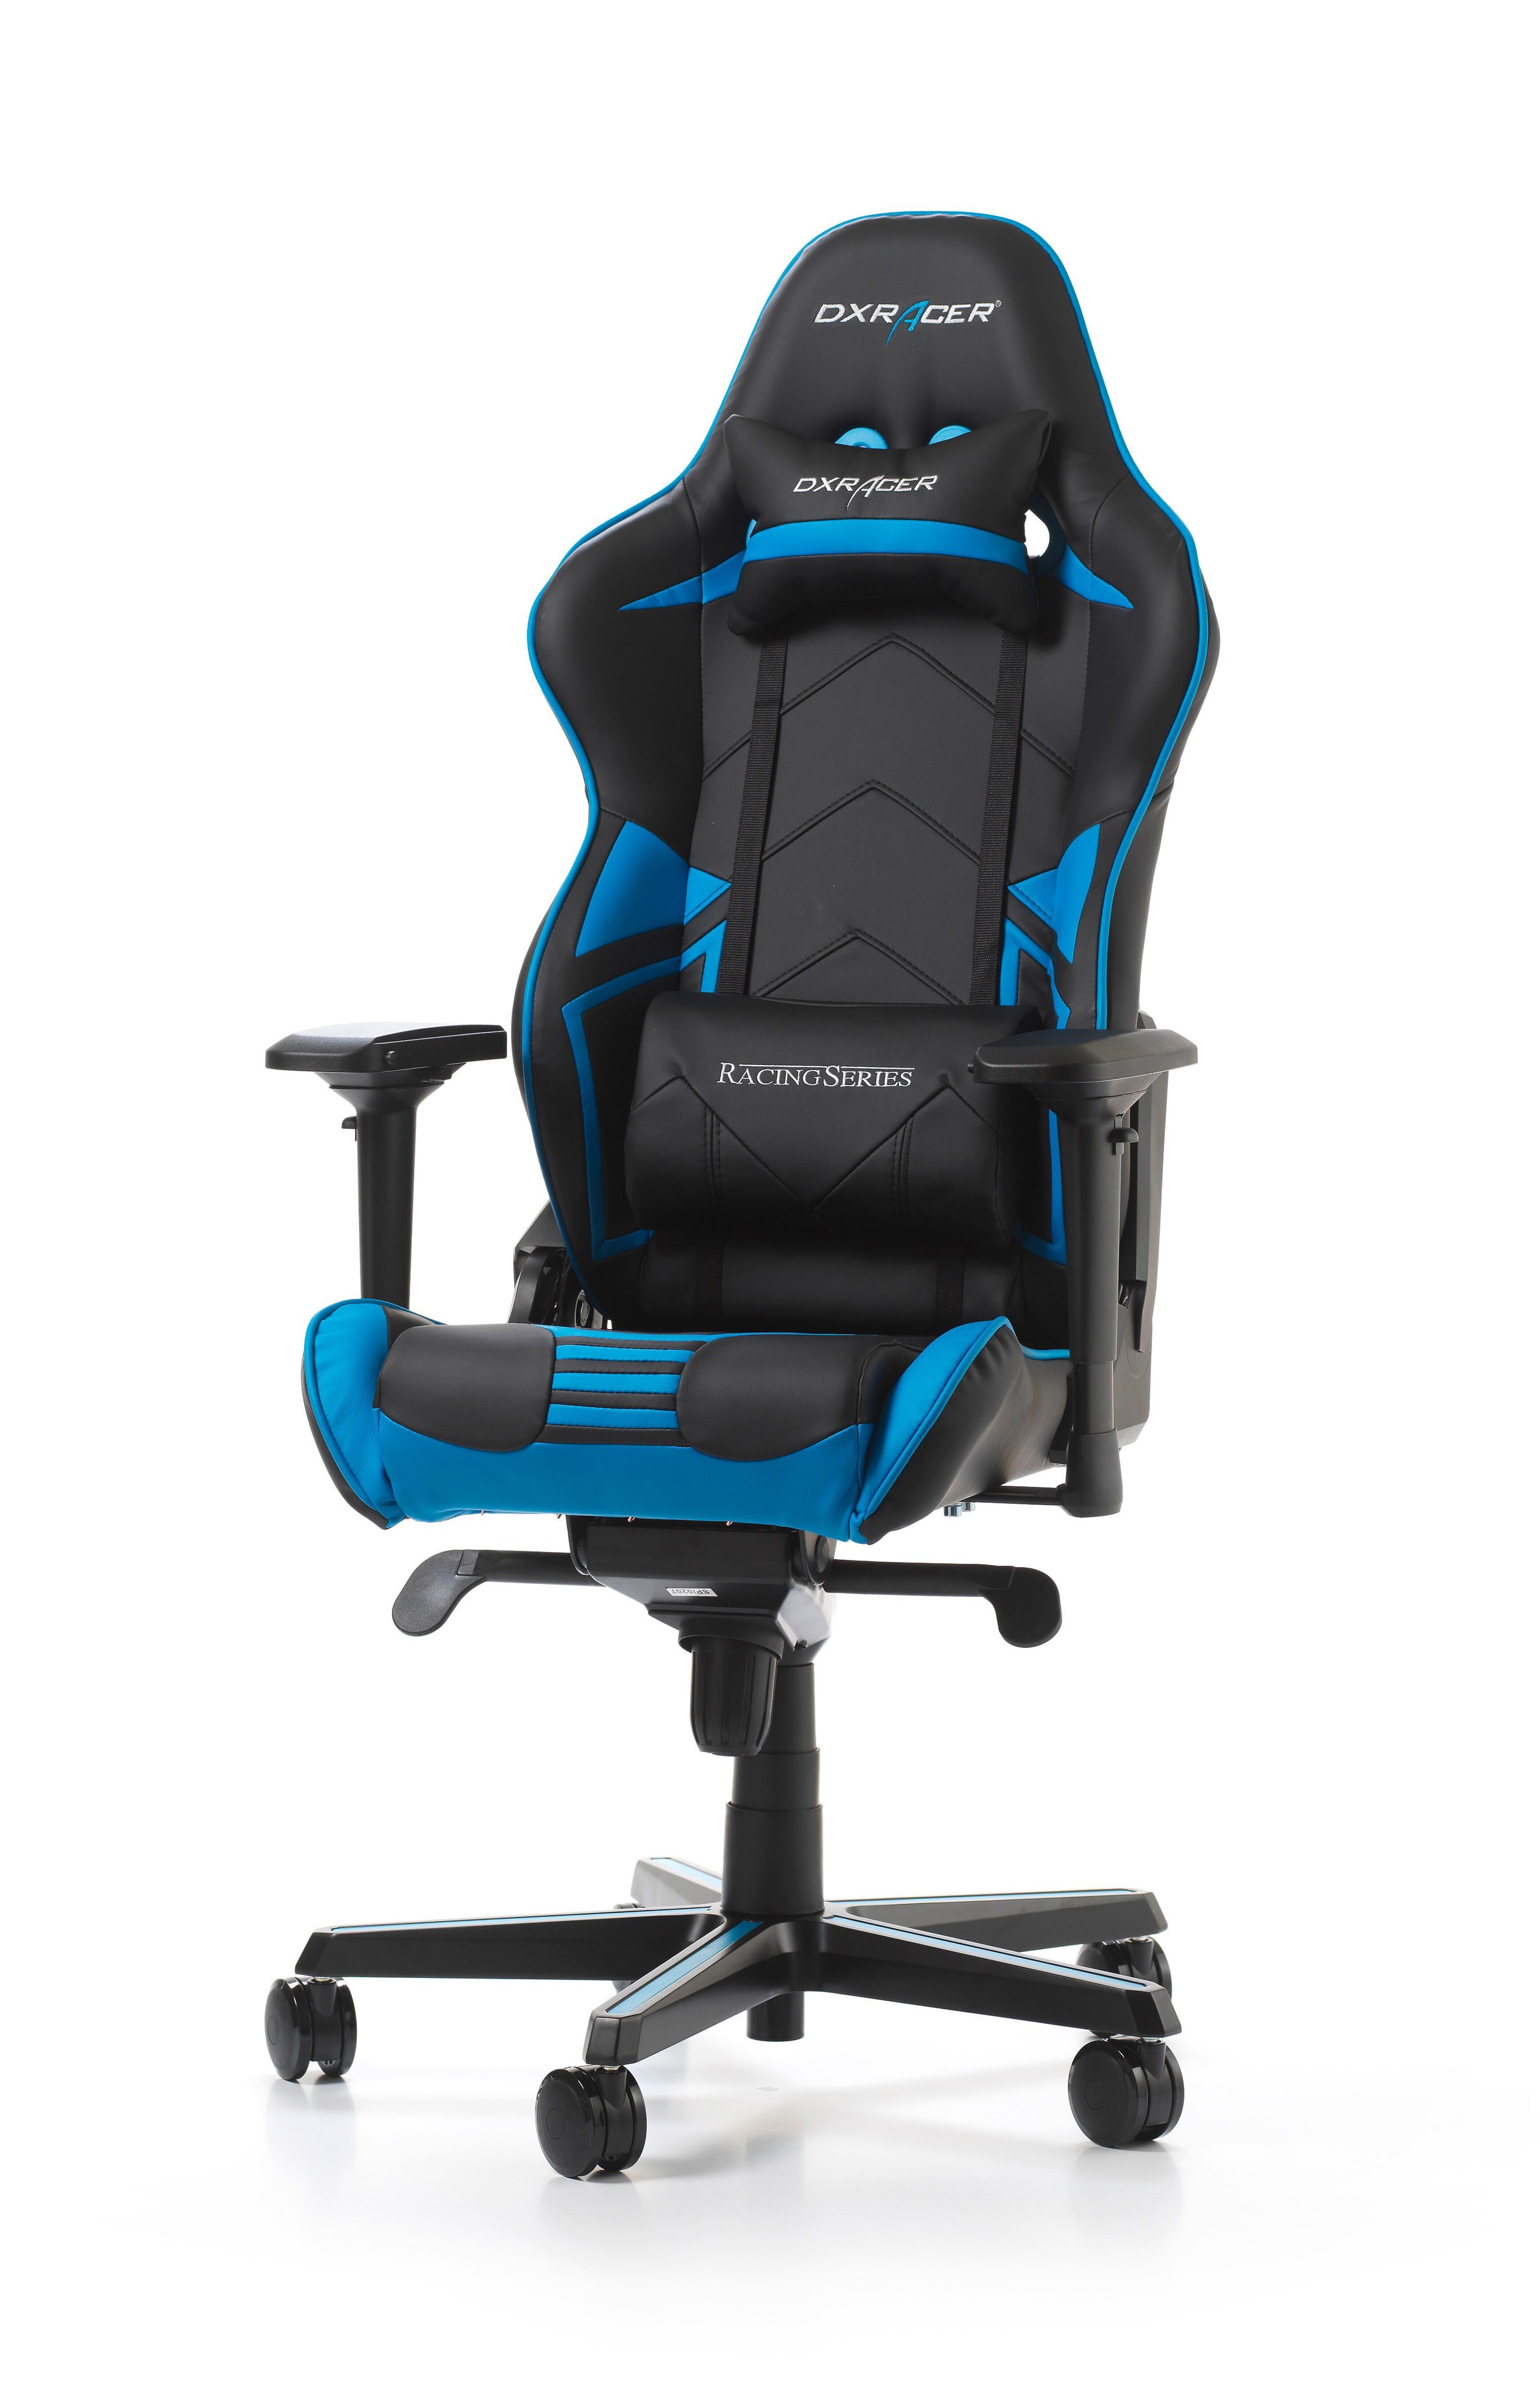 GAMING CHAIR DXRACER RACING PRO SERIES R131-NR RED